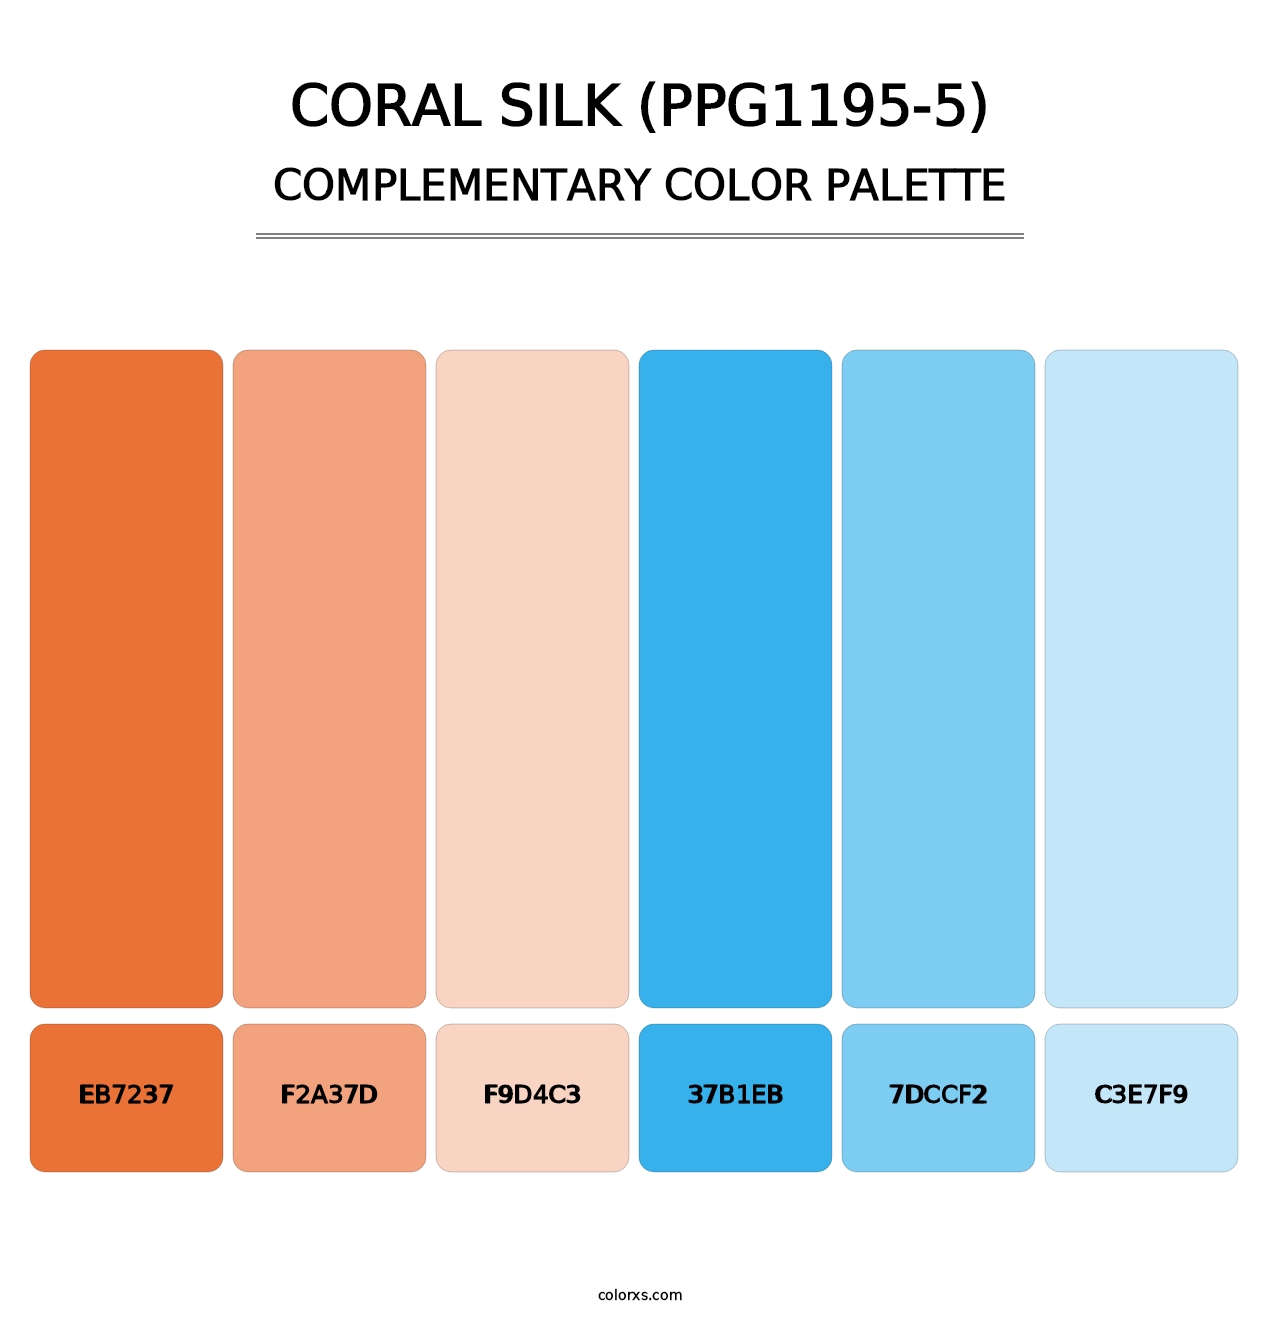 Coral Silk (PPG1195-5) - Complementary Color Palette